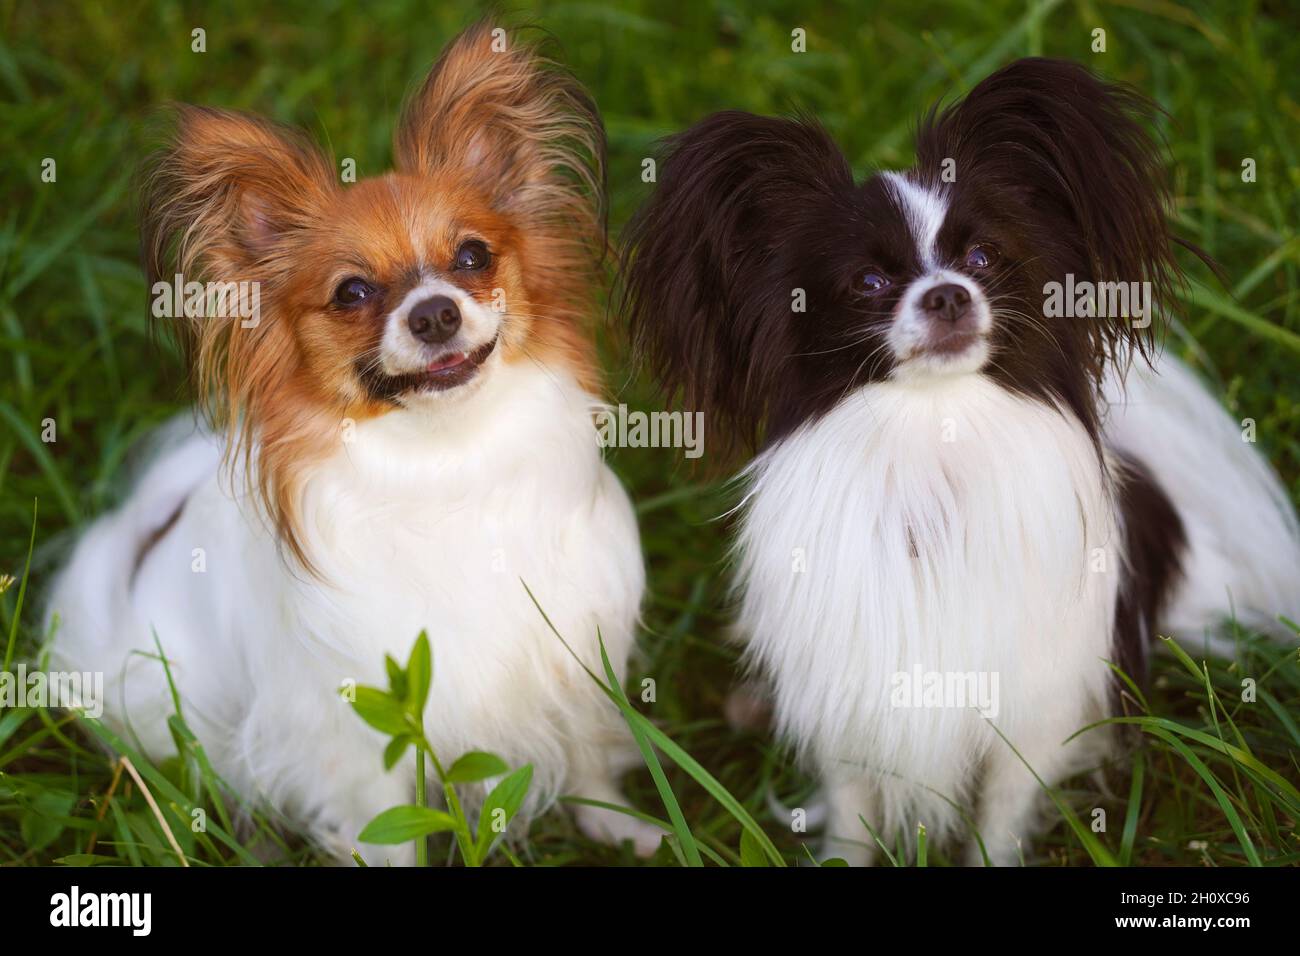 Portrait Of A Purebred Papillon Dog Sitting In A Field Stock Photo, Picture  And Royalty Free Image